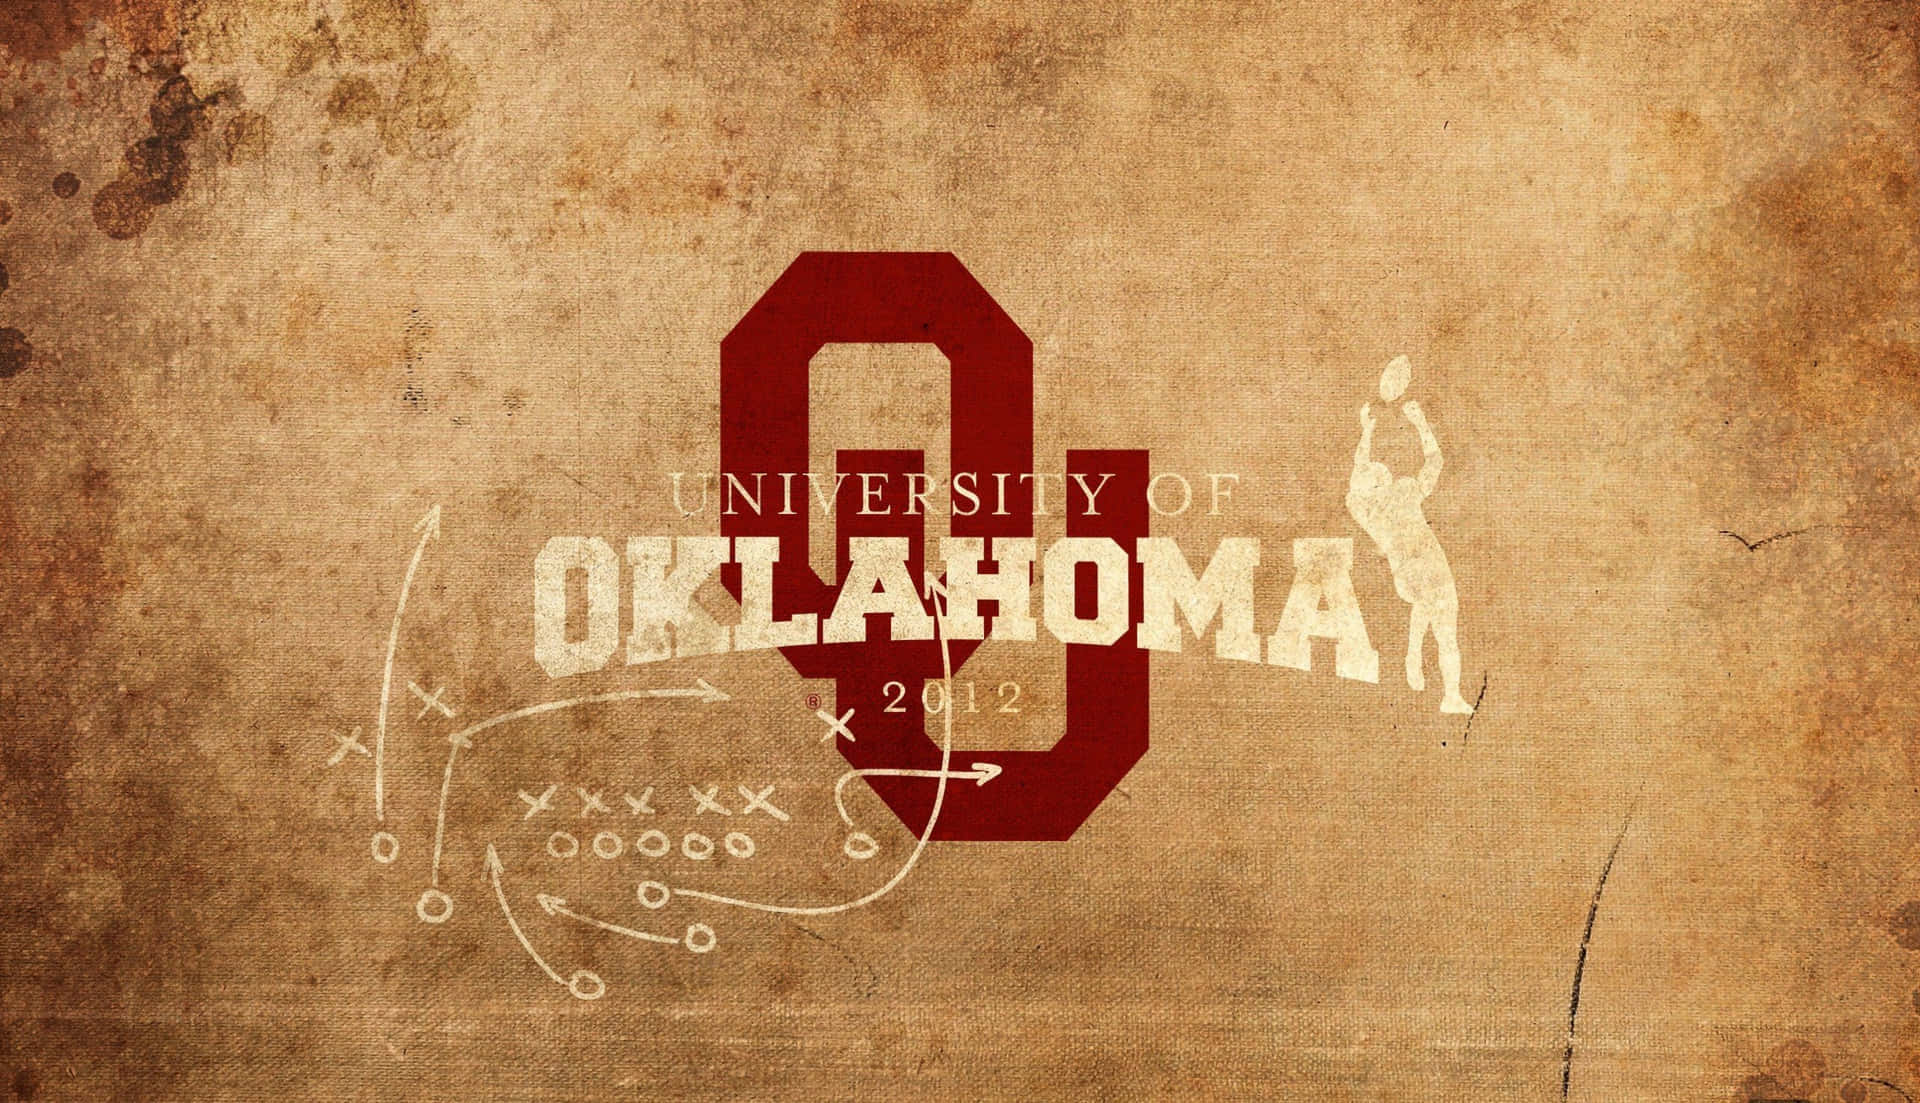 The University of Oklahoma Sooners are Ready to Compete Wallpaper